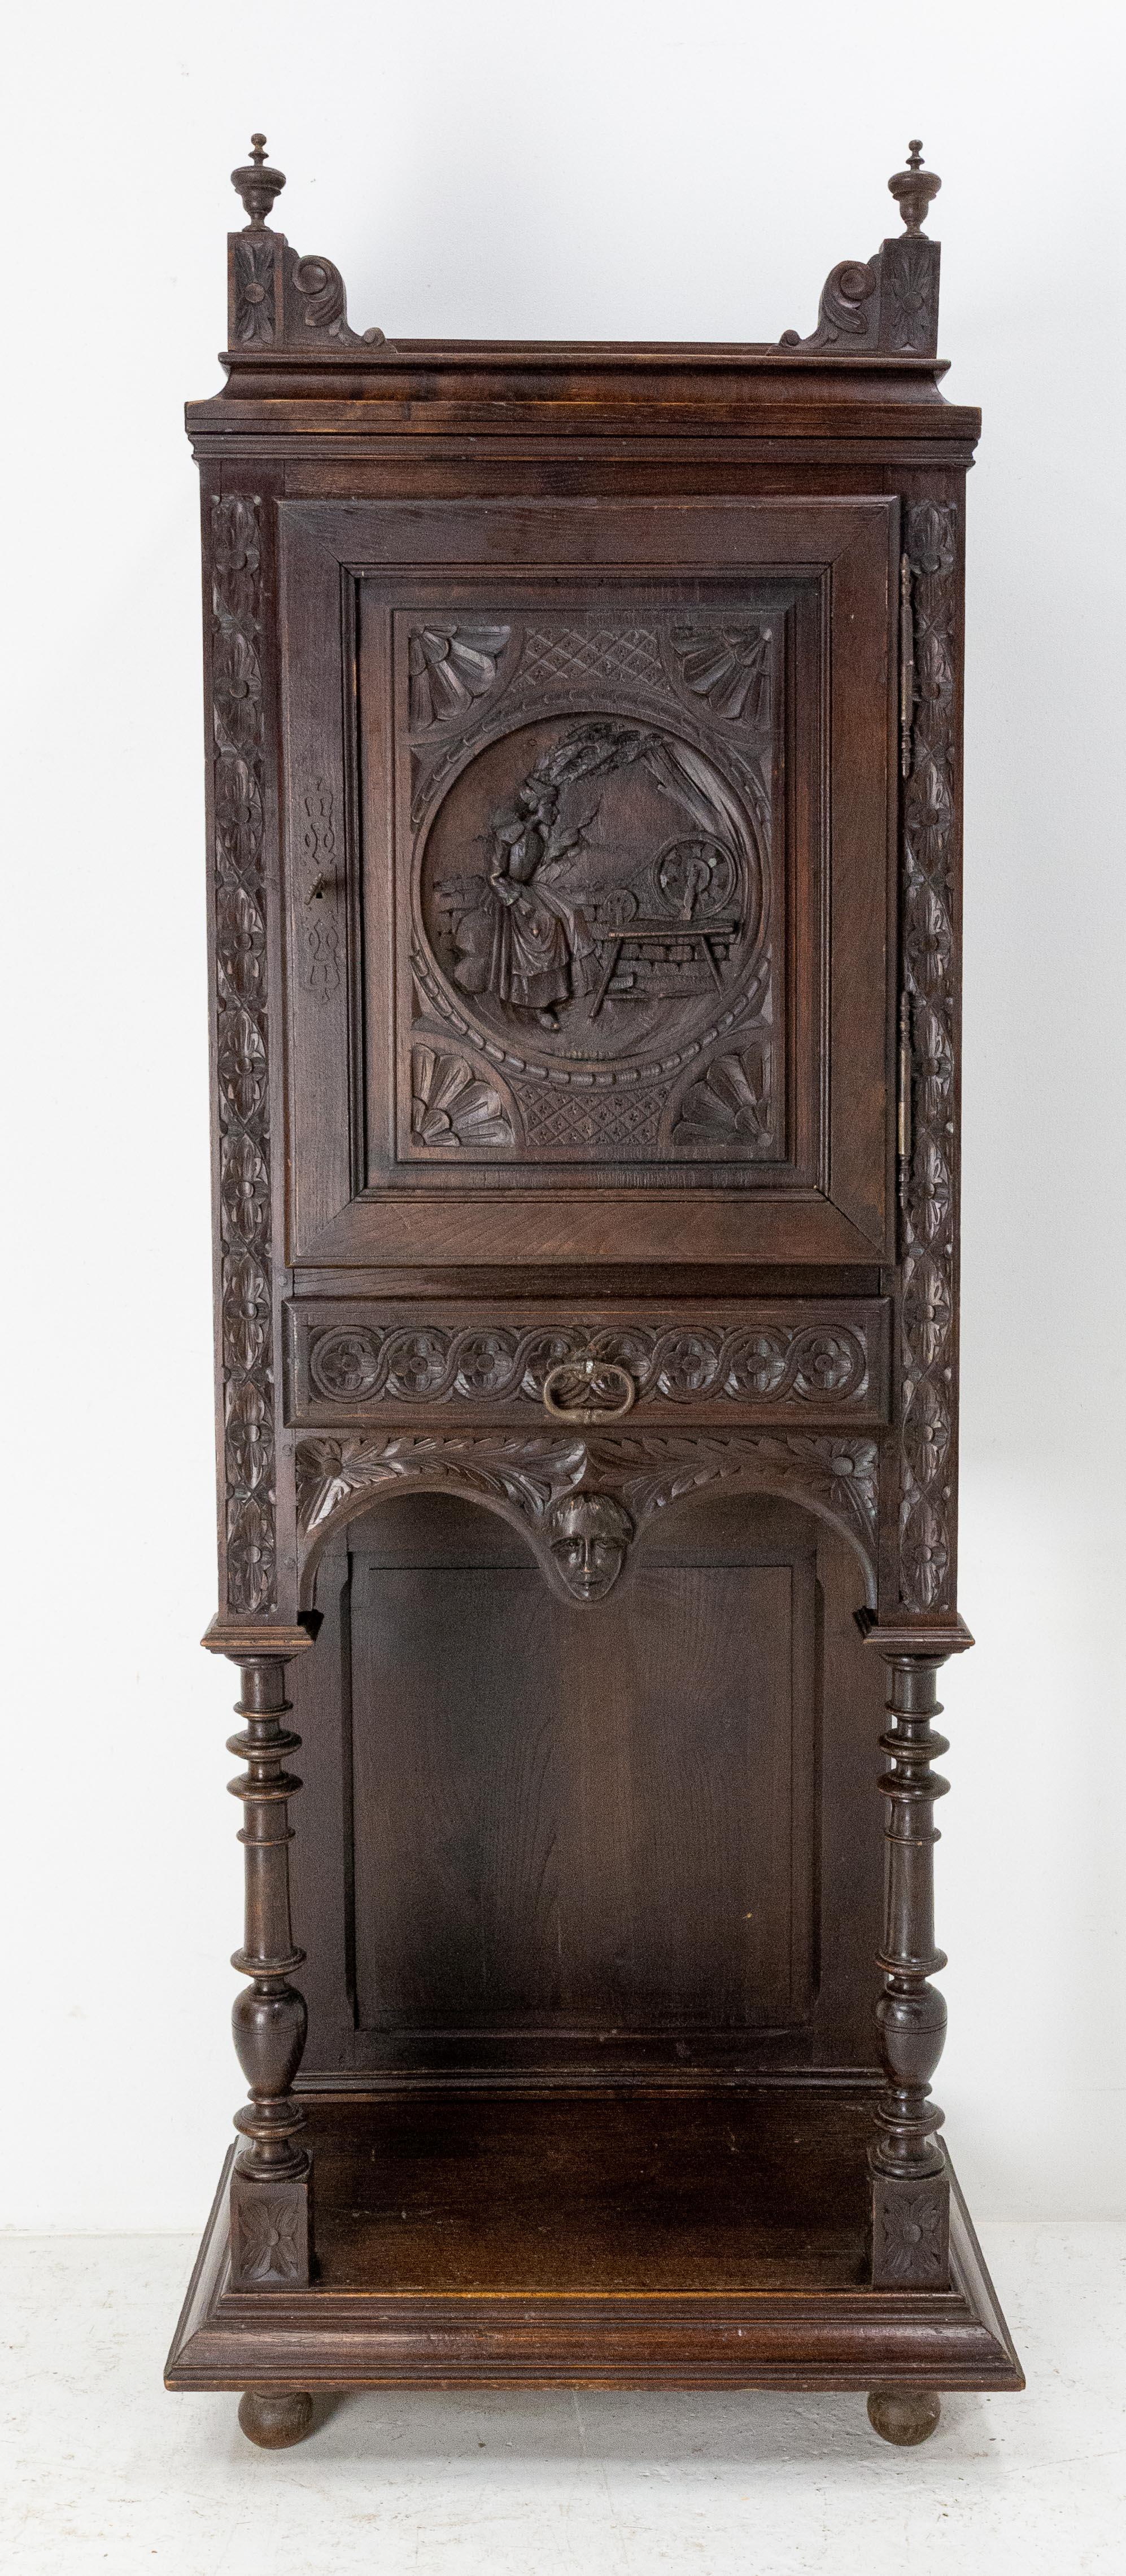 Buffet dressoir French cabinet, circa 1880
One carved door representing a woman spinning wool and one drawer.
Florals motifs on the front and one the sides of the cabinet
Massive chestnut
Nice patina
Good antique condition

Shipping: 
L65